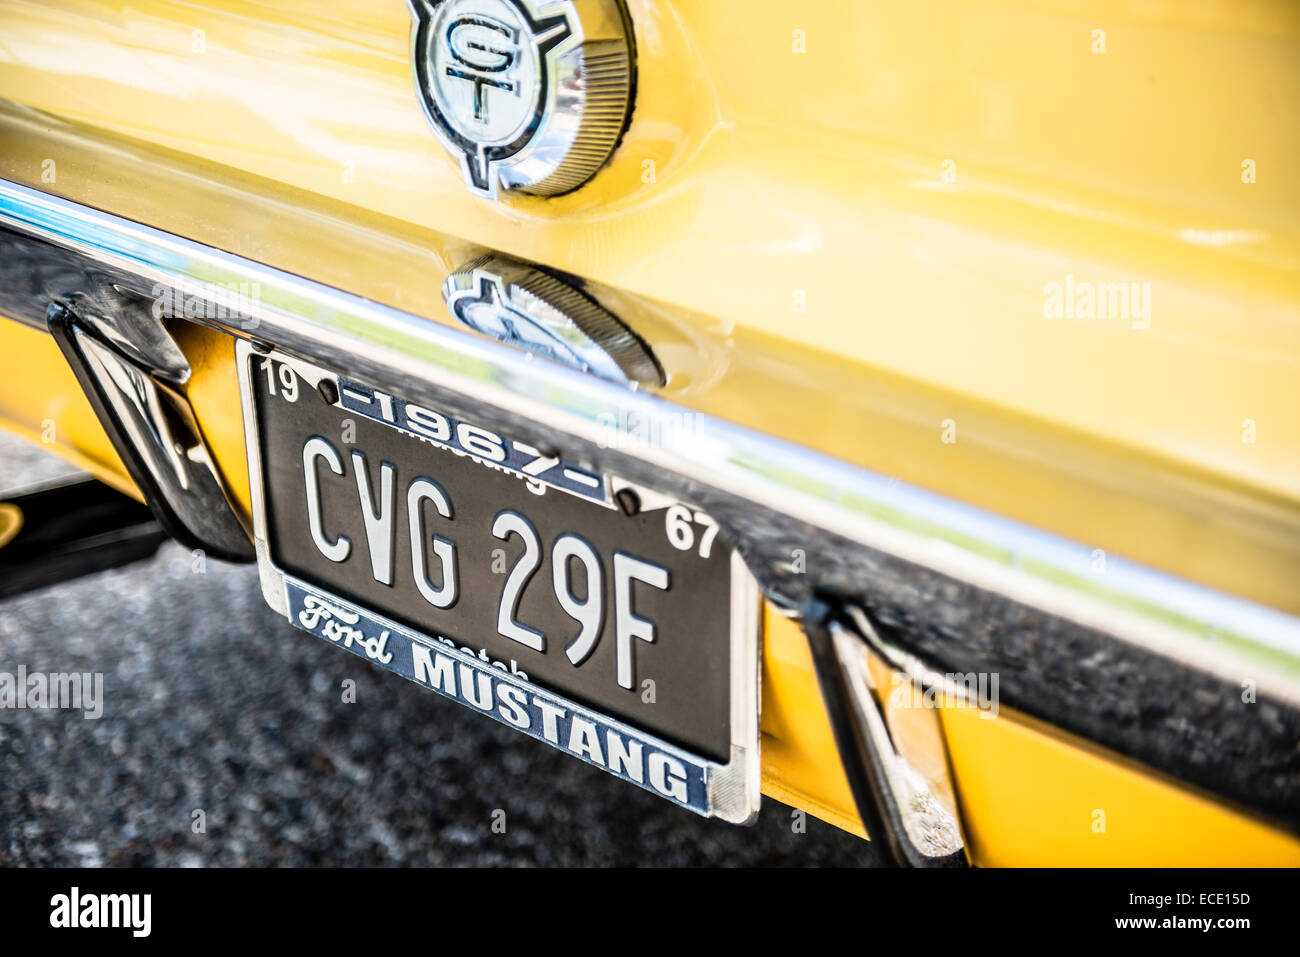 Yellow Ford Mustang, GT, number plate Stock Photo